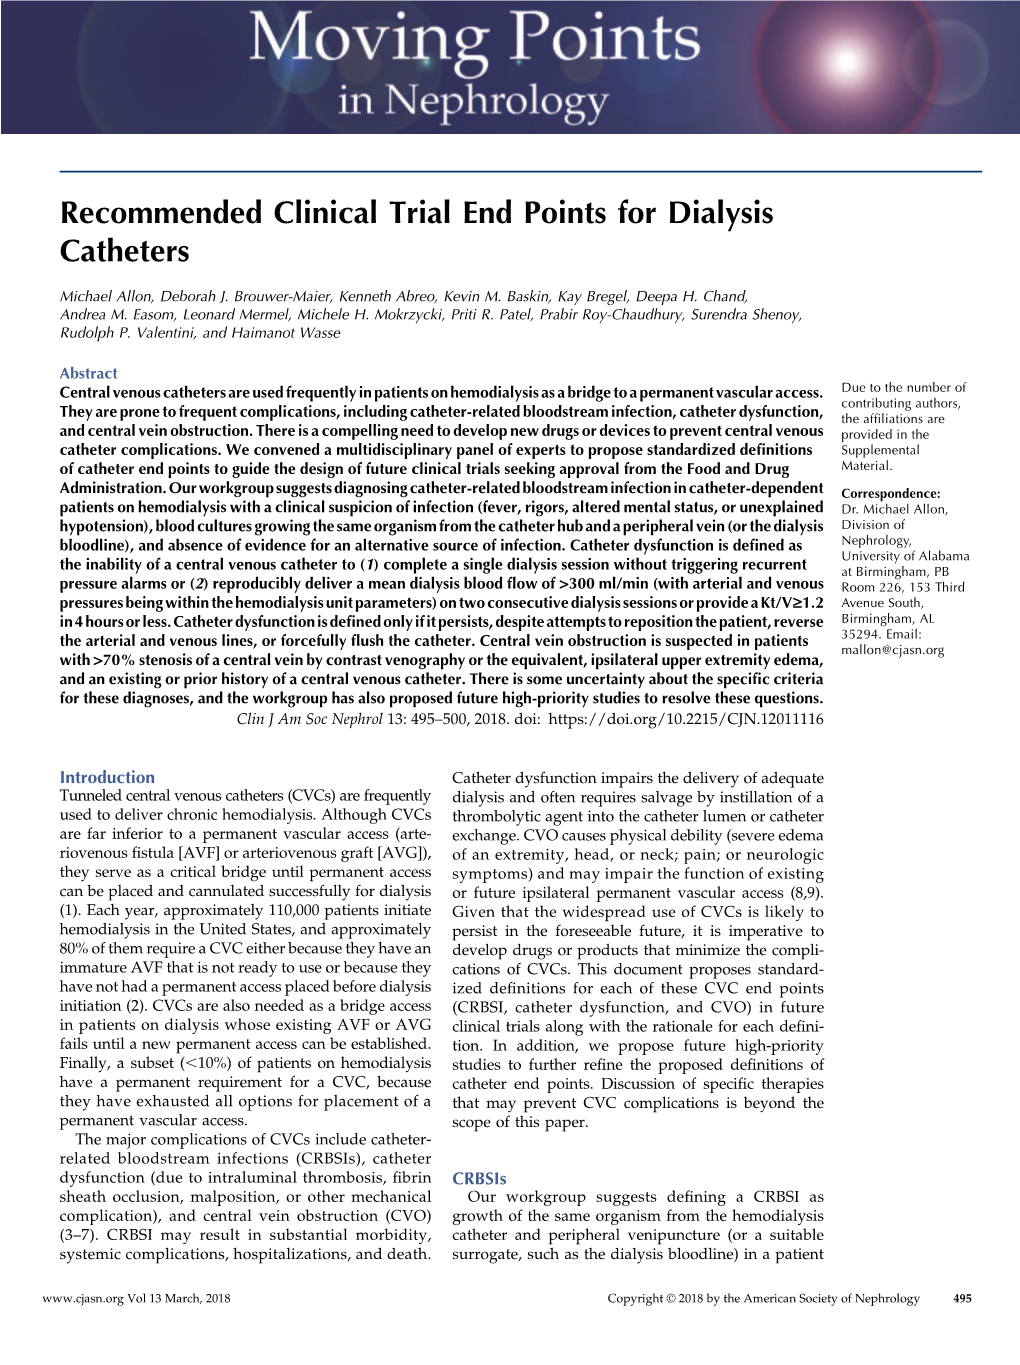 Recommended Clinical Trial End Points for Dialysis Catheters